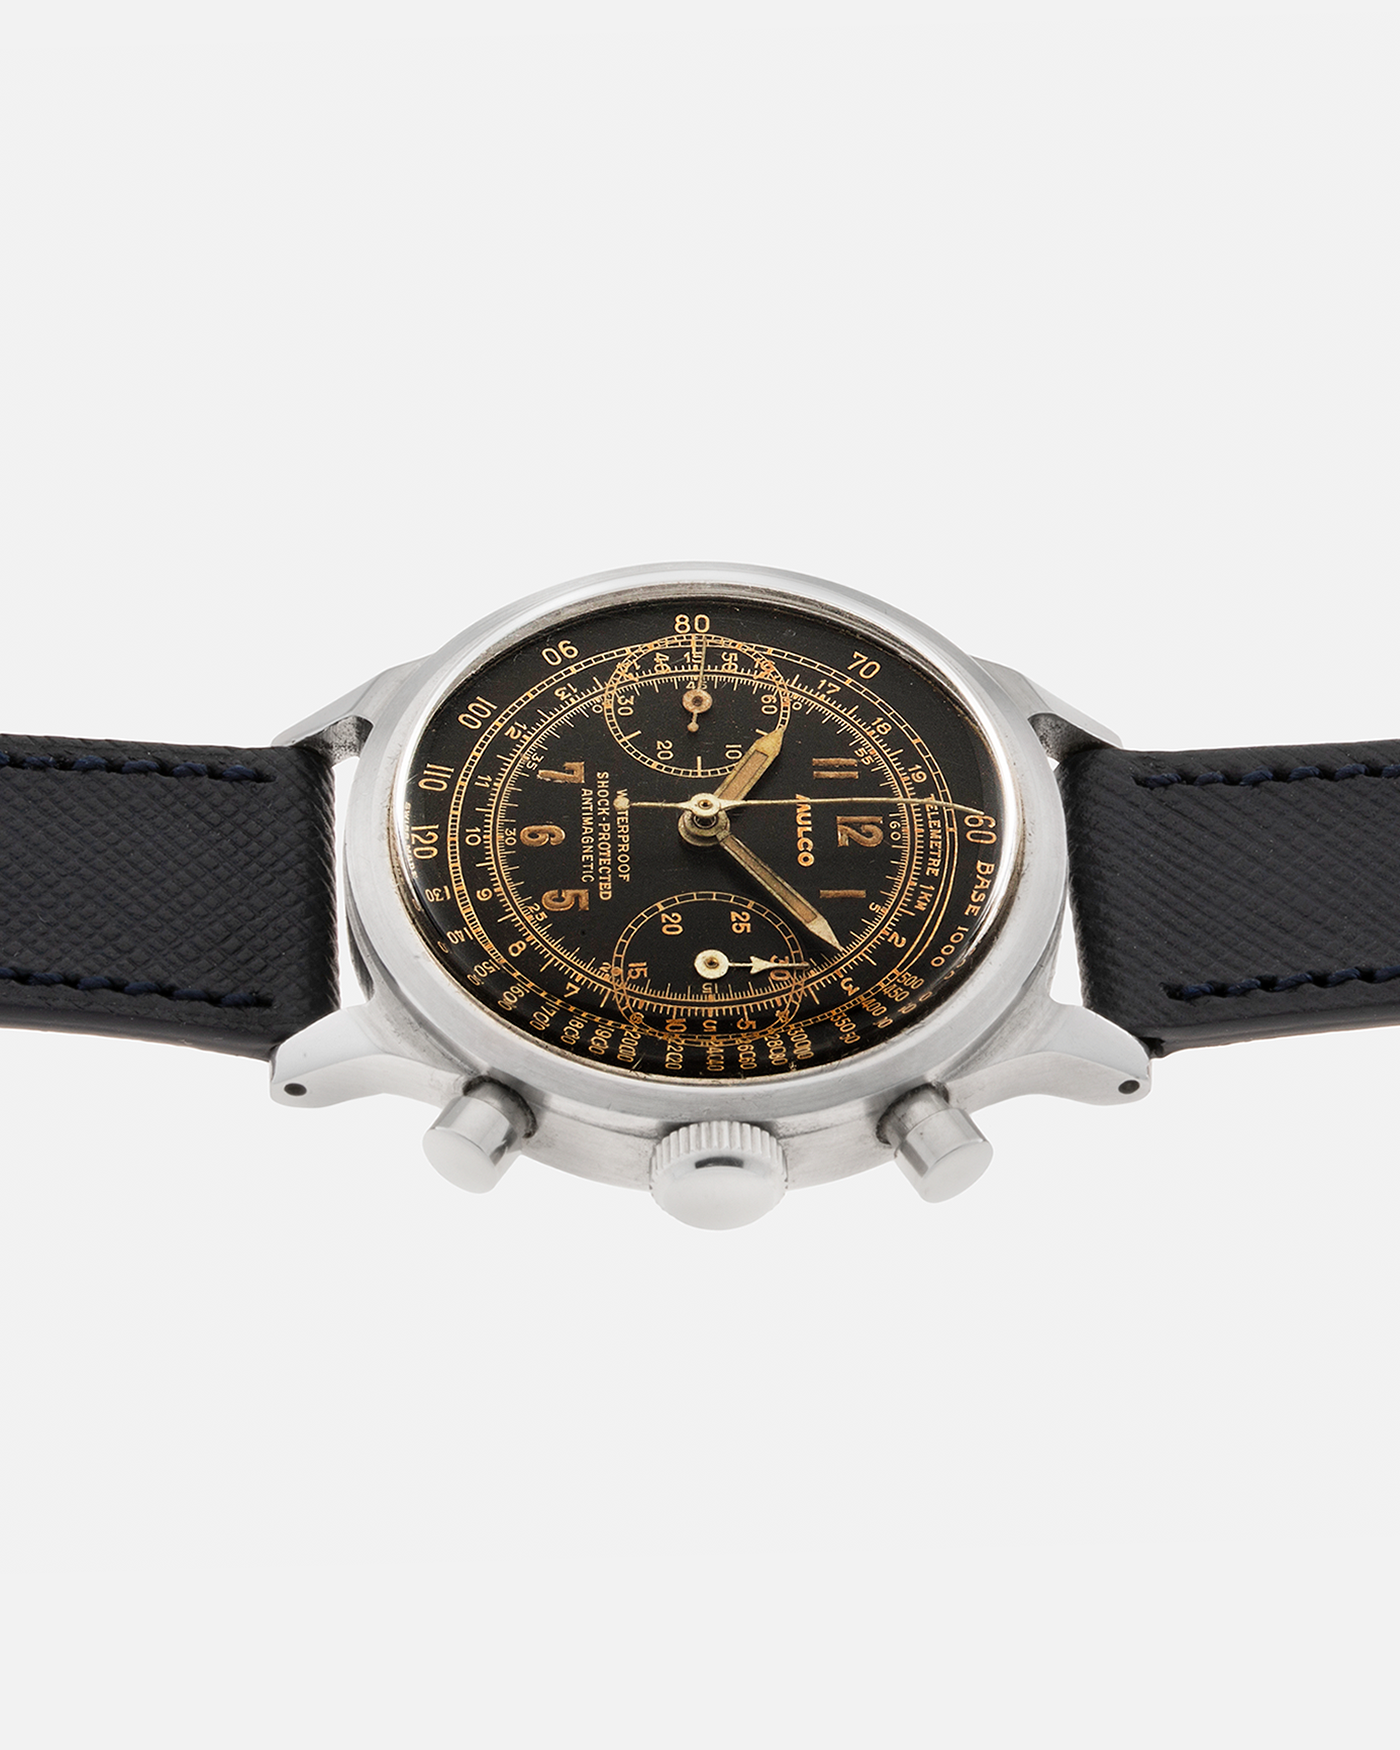 Brand: Mulco Year: 1940s Material: Stainless Steel Movement: Valjoux Cal. 22, Manual-Winding Case Diameter: 38mm (Spillman Case) Lug Width: 19mm Strap: Molequin Navy Textured Calf Leather Strap